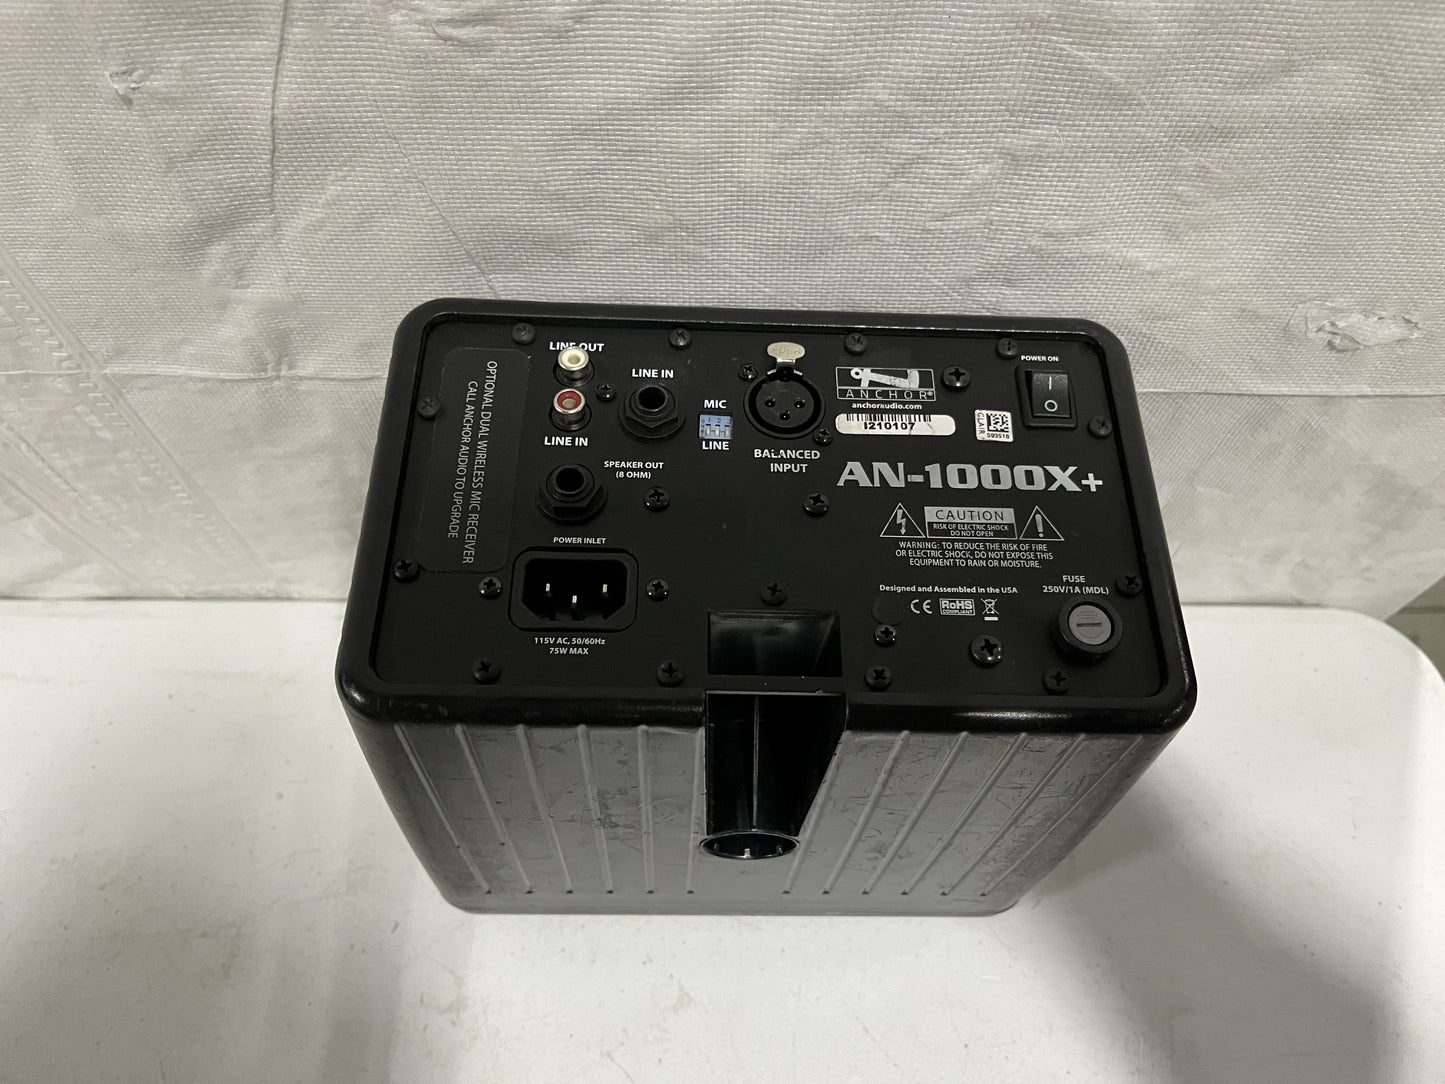 Anchor Audio AN-1000X+ Two Way Powered Monitor Portable Speaker. We Sell Professional Audio Equipment. Audio Systems, Amplifiers, Consoles, Mixers, Electronics, Entertainment, Sound, Live.